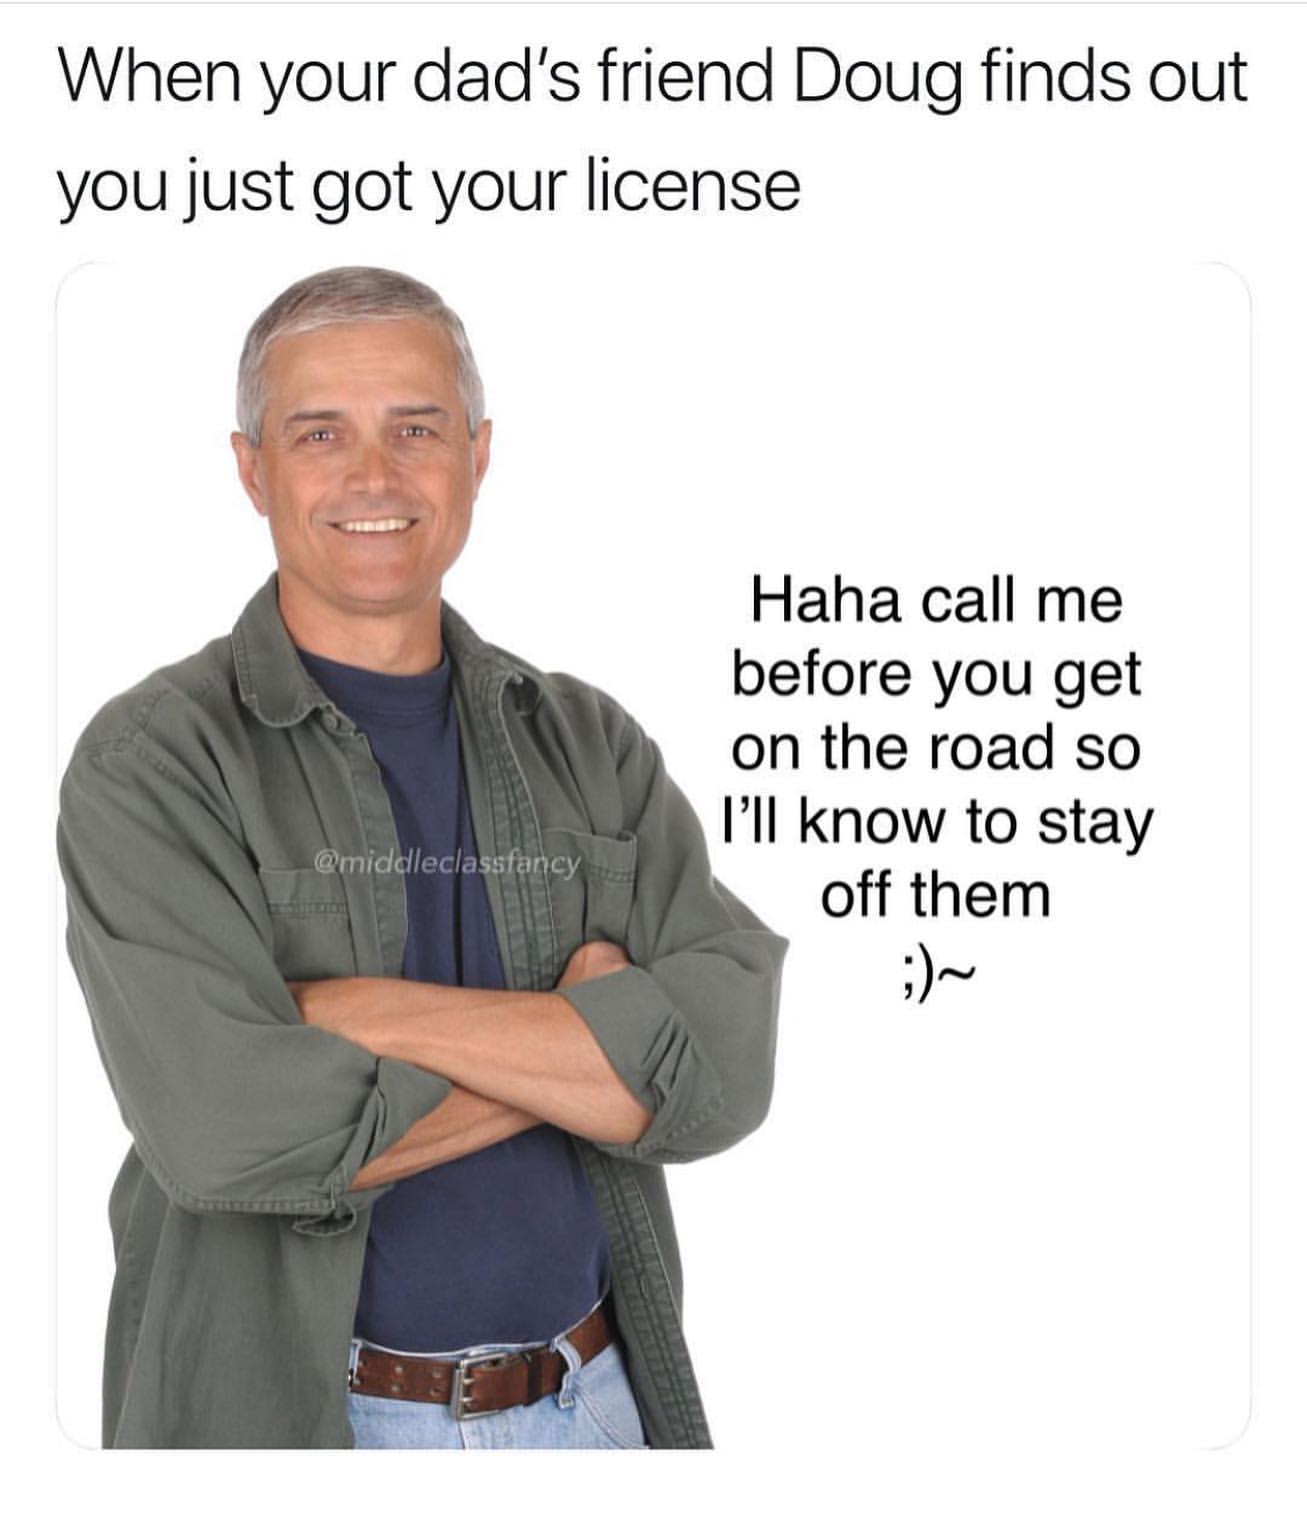 middle class fancy rand - When your dad's friend Doug finds out you just got your license Haha call me before you get on the road so I'll know to stay off them